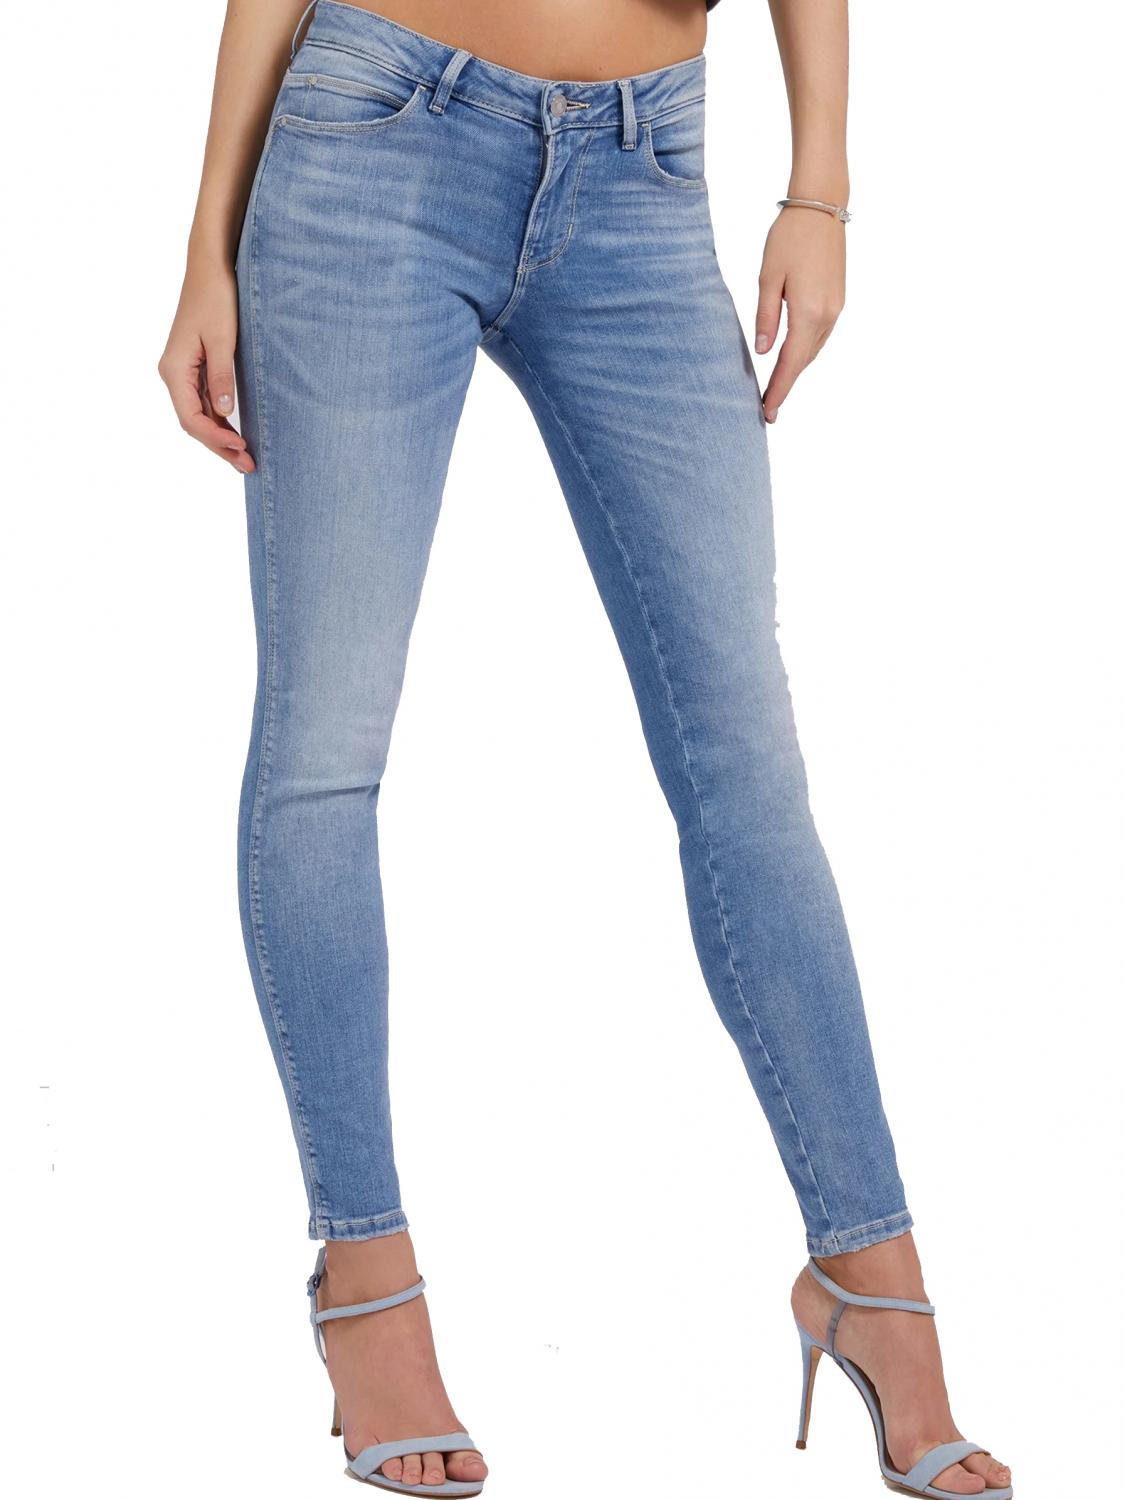 Guess Curve X Skinny Jeans Carrie Light. Buy At Outlet Prices!